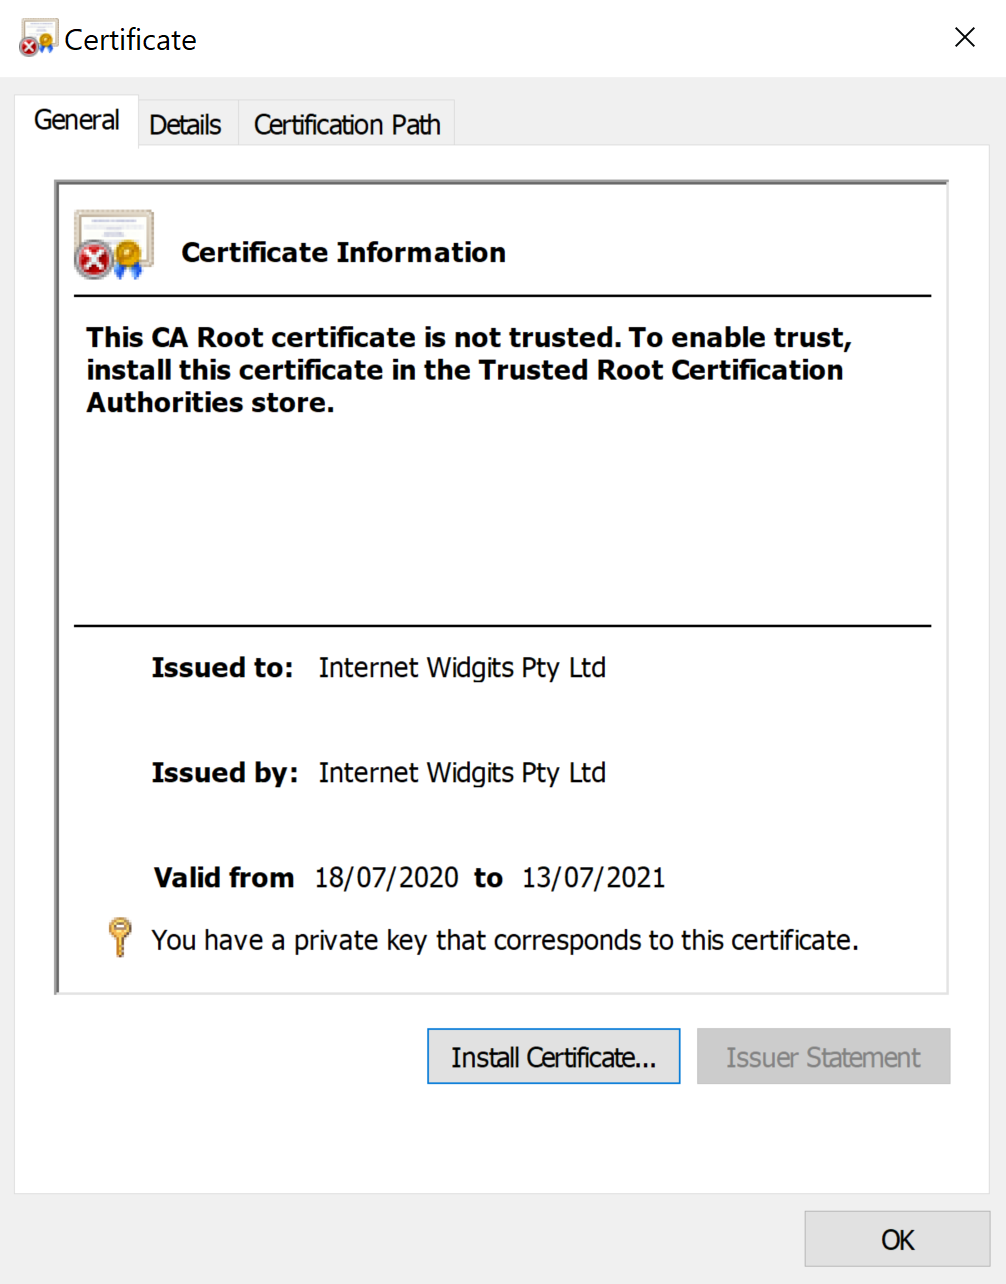 A certificate, opened in Windows 10, showing that a private key corresponding to this certificate is present.